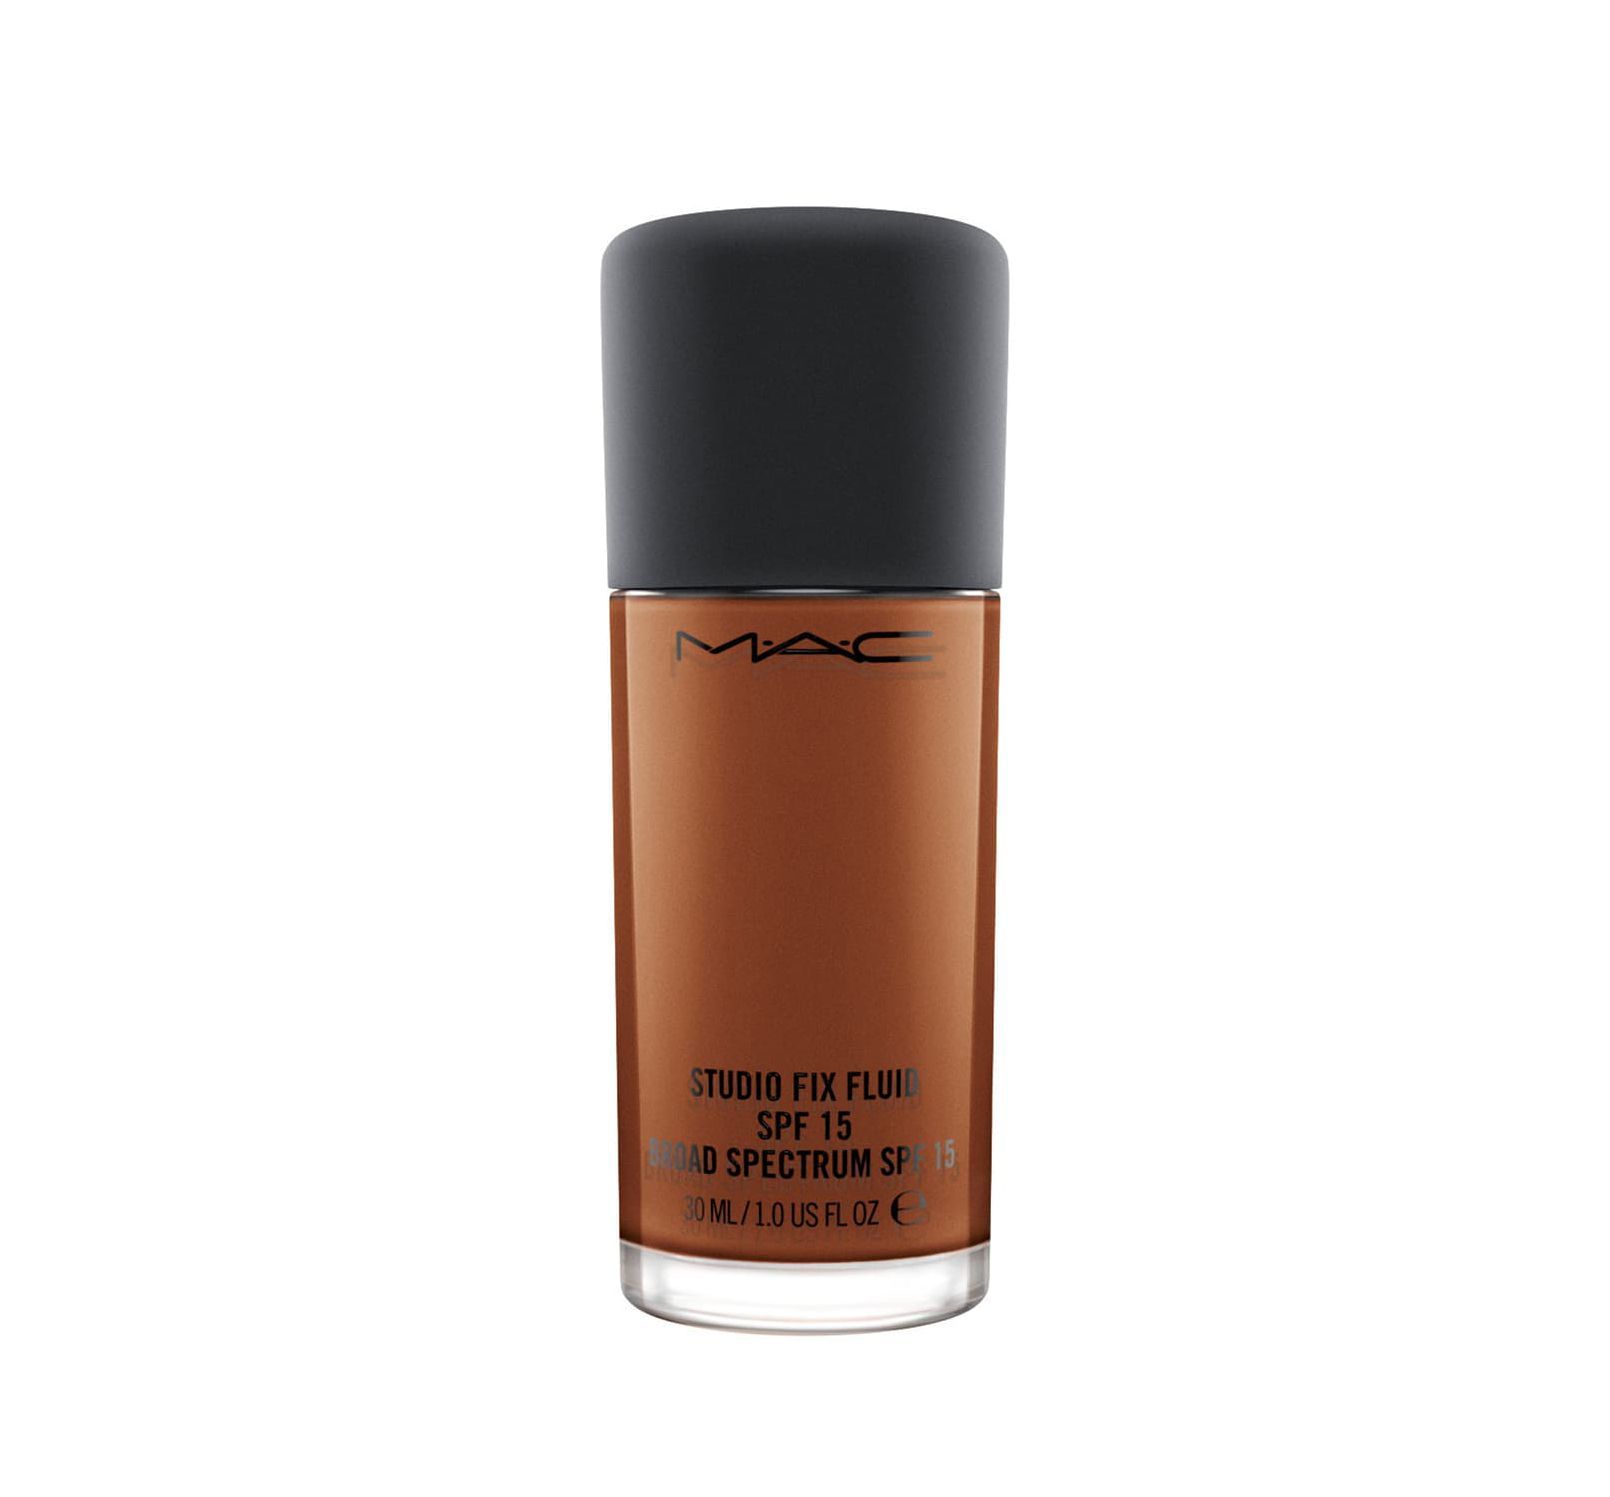 which mac foundation is best for dry skin?